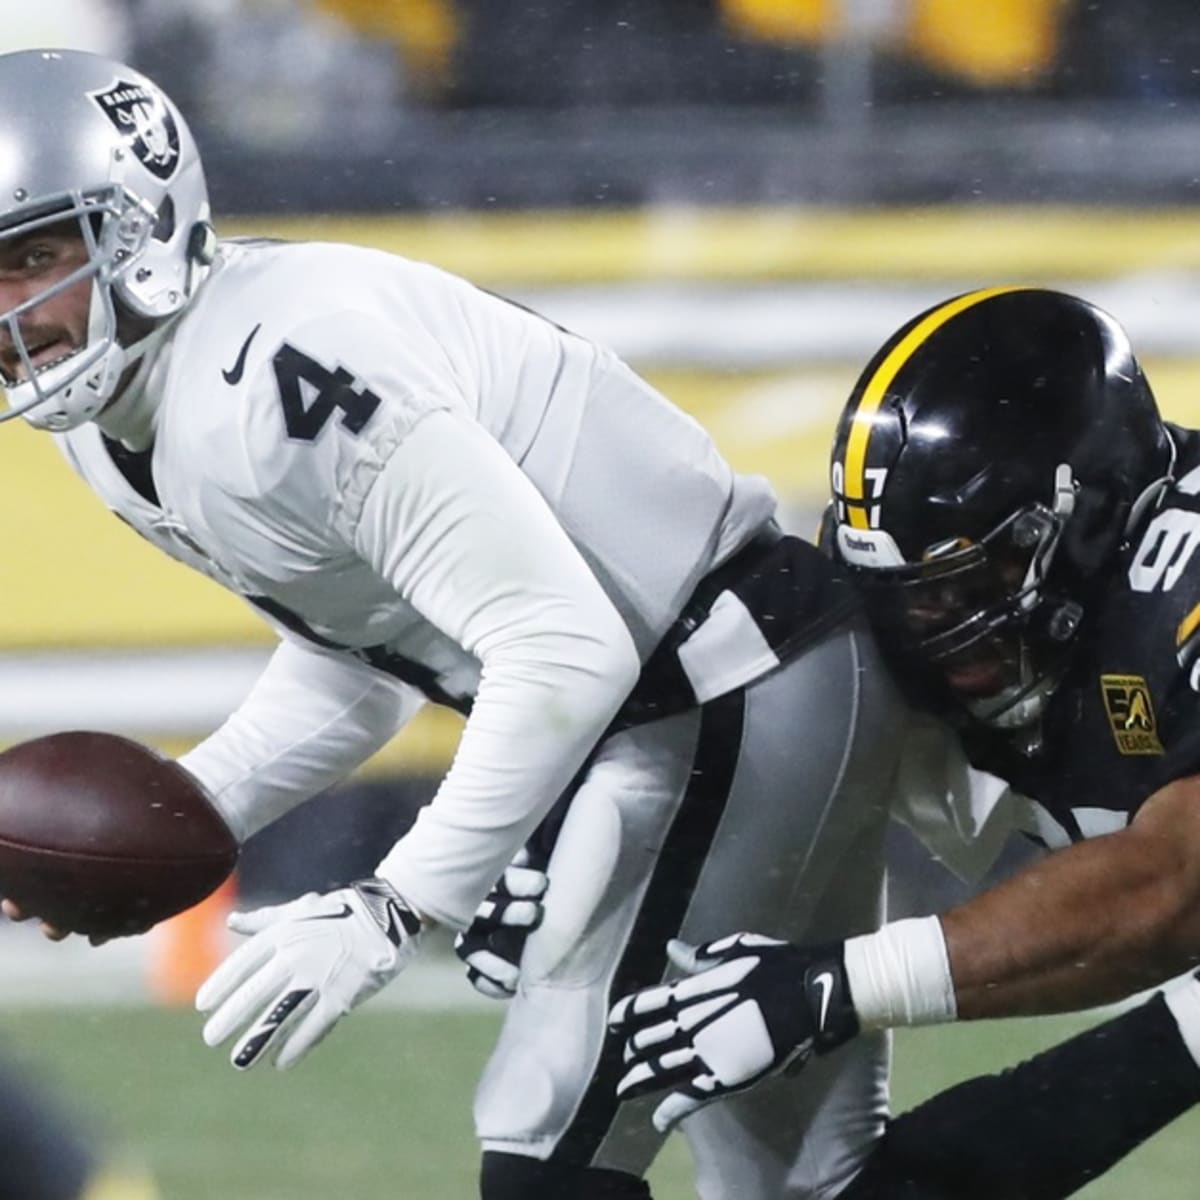 Raiders fall in another close game, lose 13-10 to Steelers